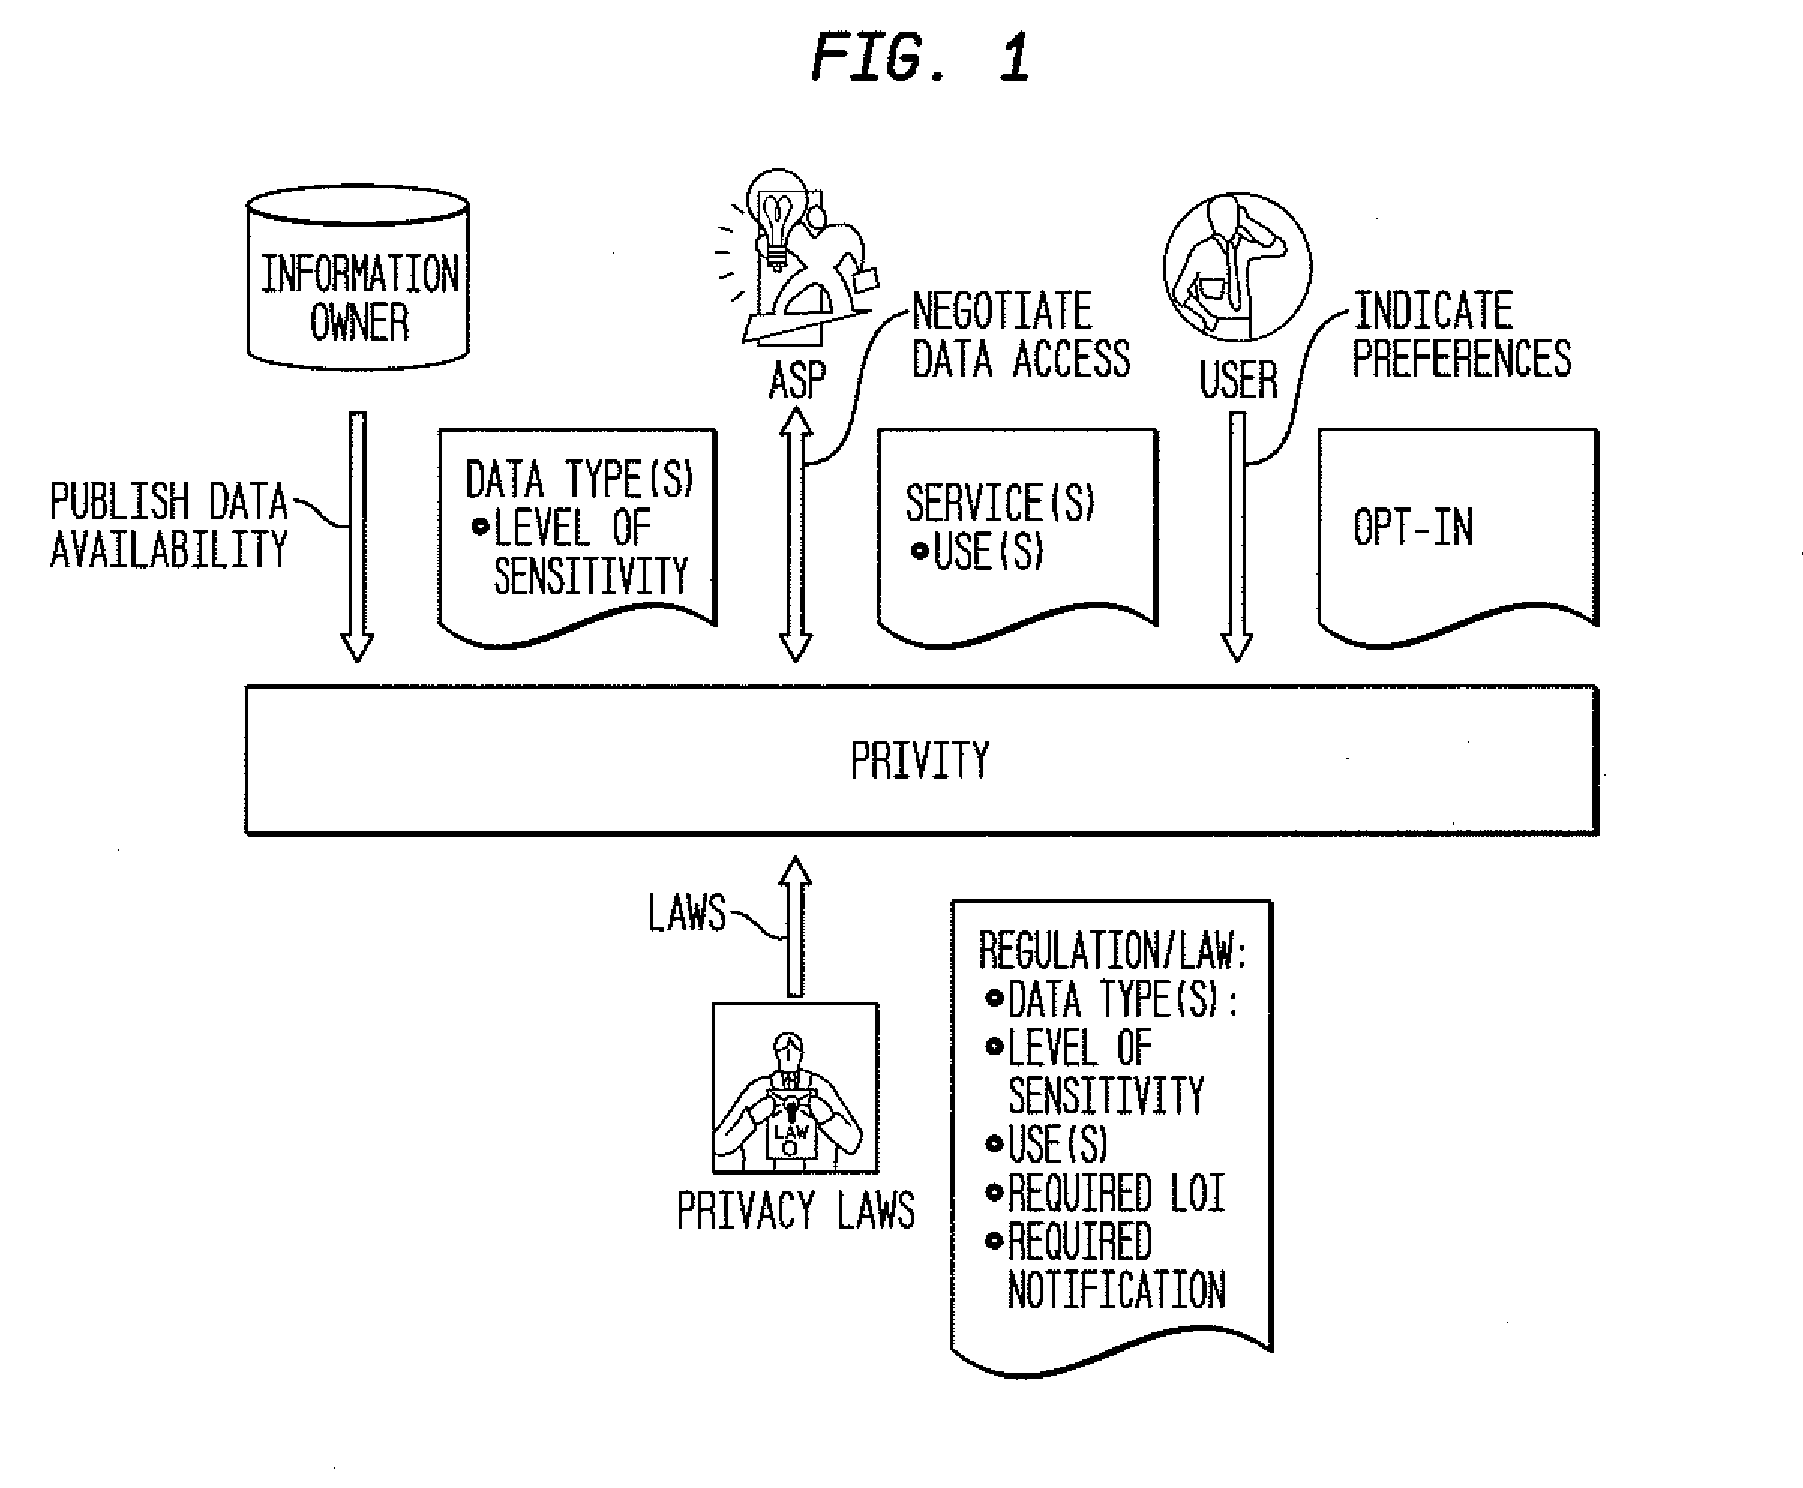 System and method establishing trusted relationships to enable secure exchange of private information